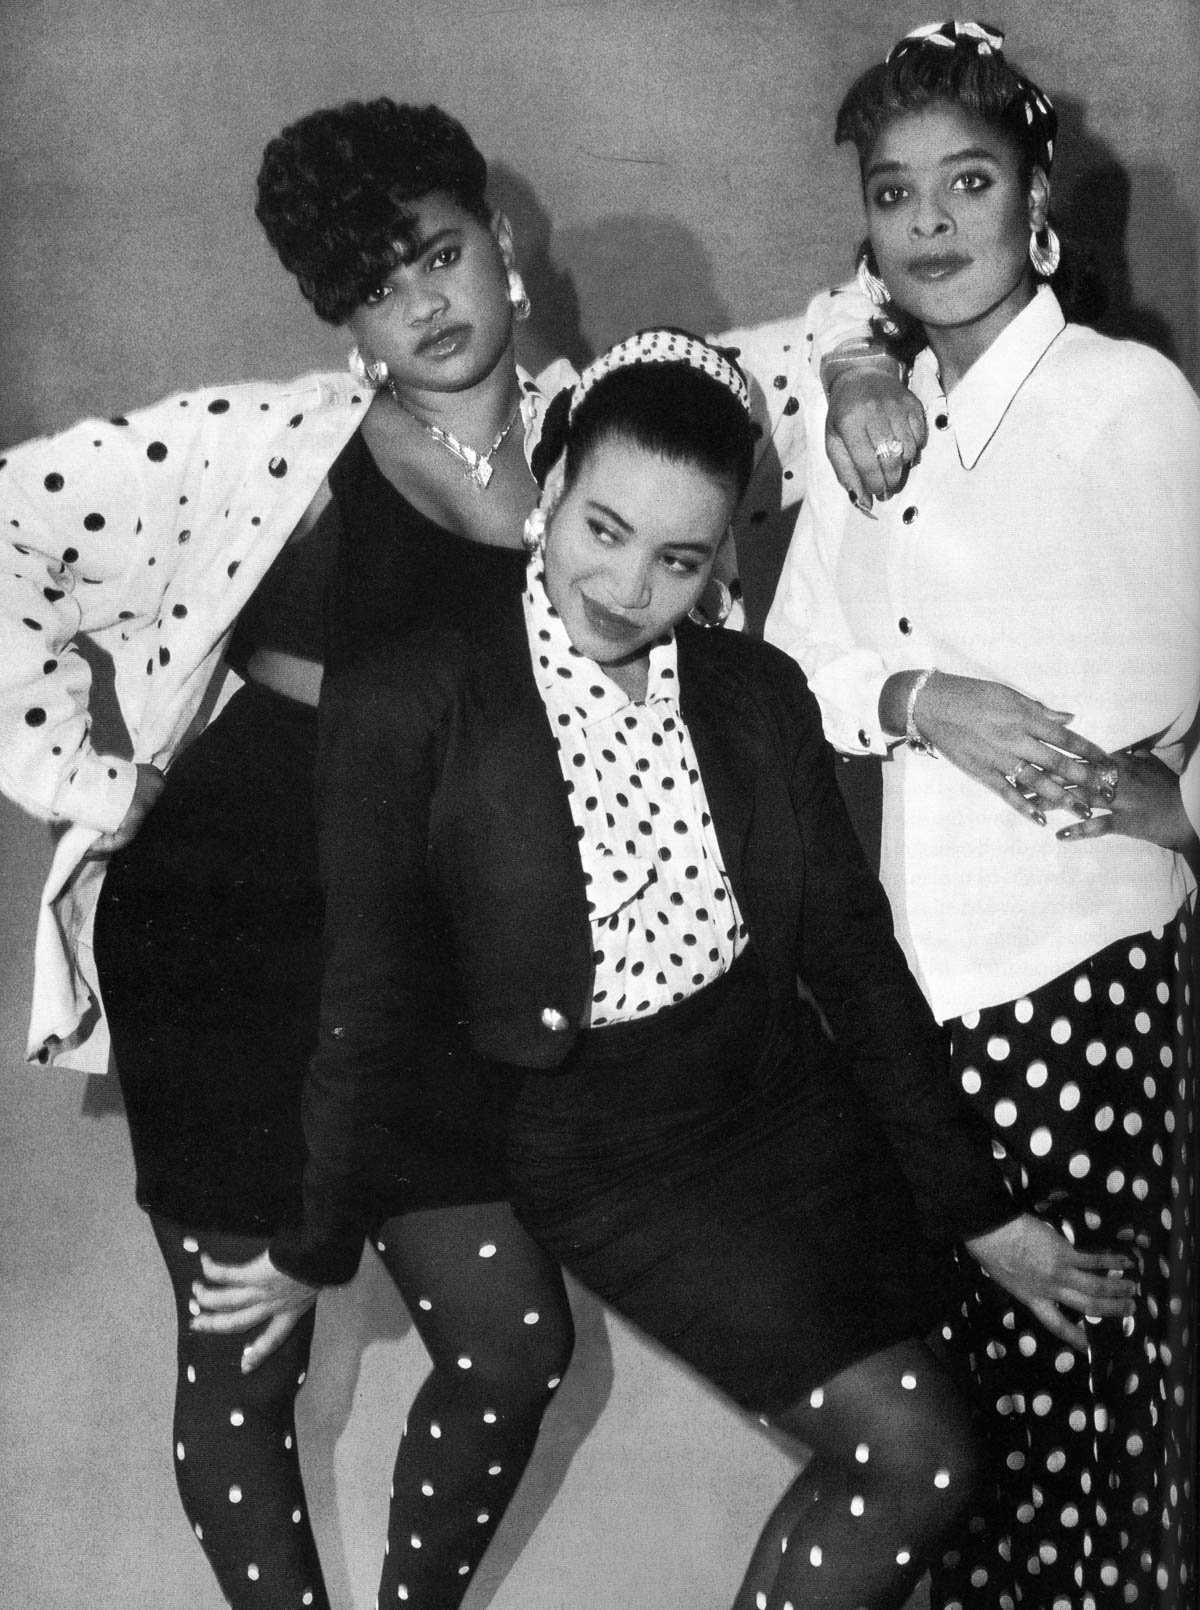 A photograph of musicians Salt-N-Pepa and DJ Spinderella, date unknown.